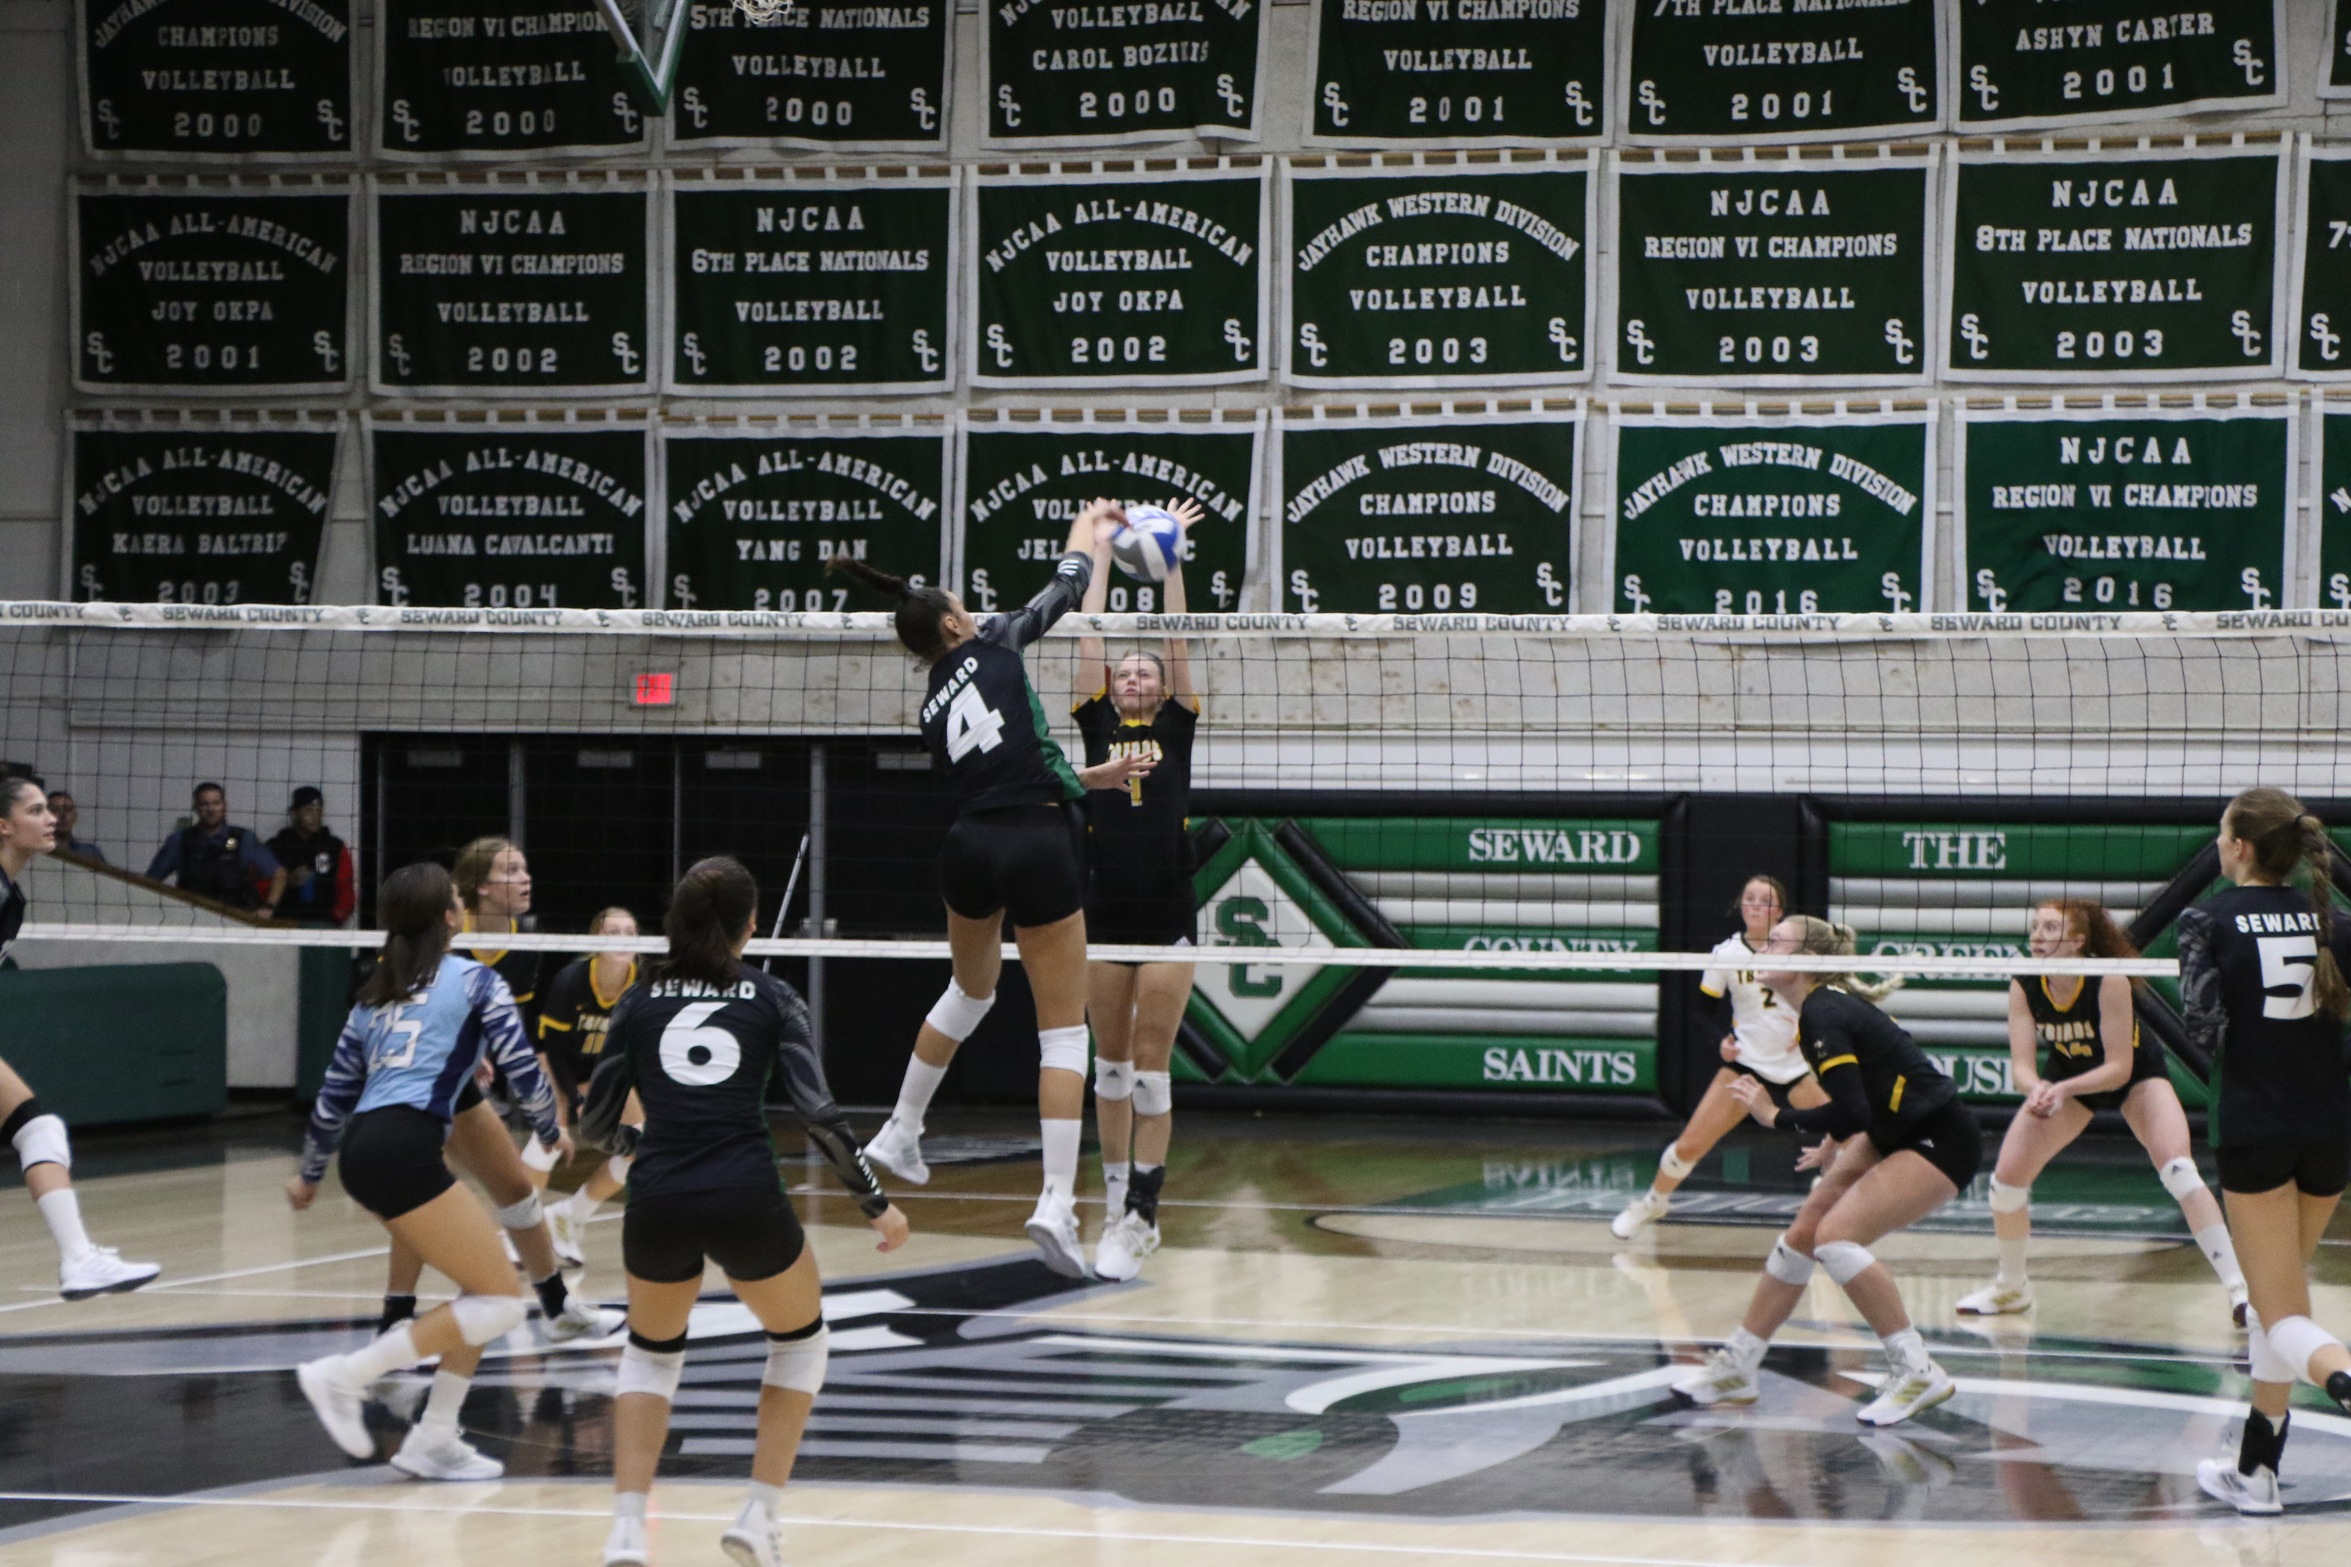 The Lady Saints stay strong at home with a sweep over Cloud County